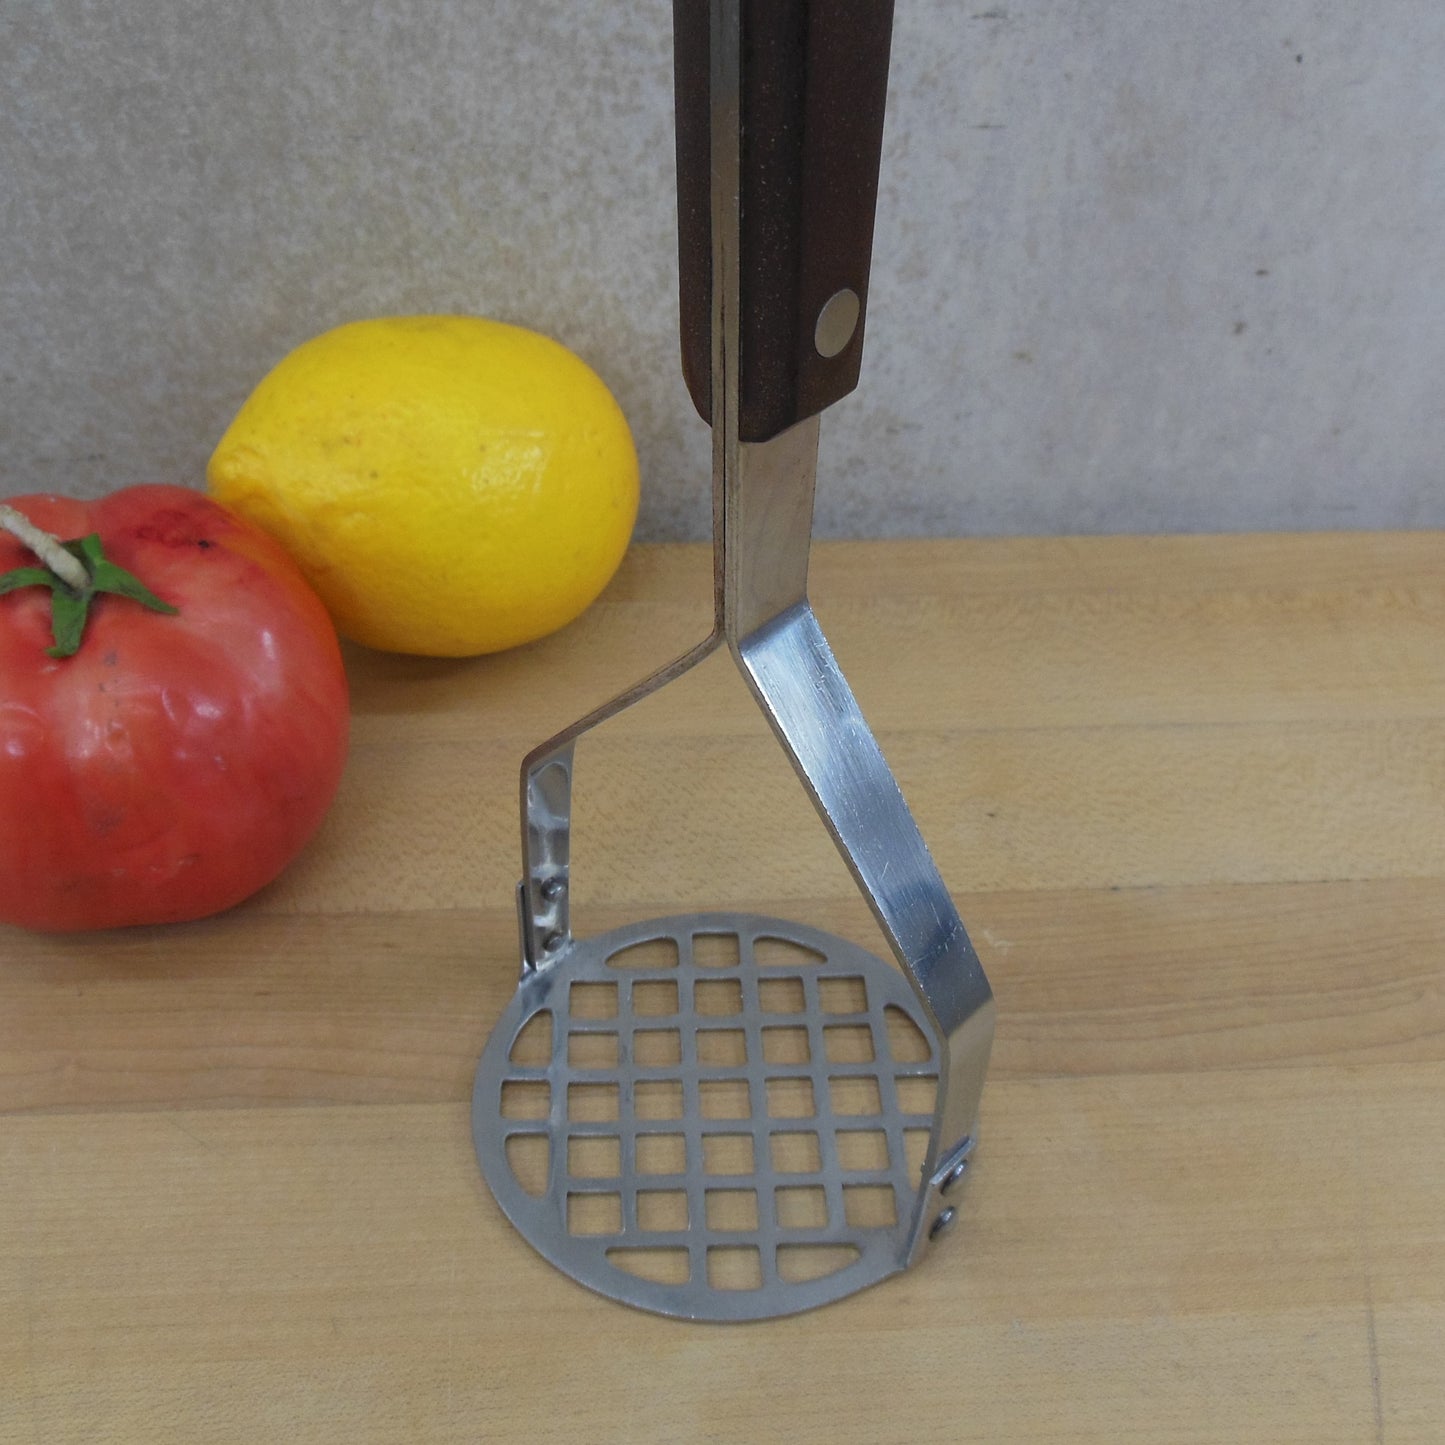 Pyramid Japan Stainless Masher Potato Vegetable- Brown Canoe Muffin Handle